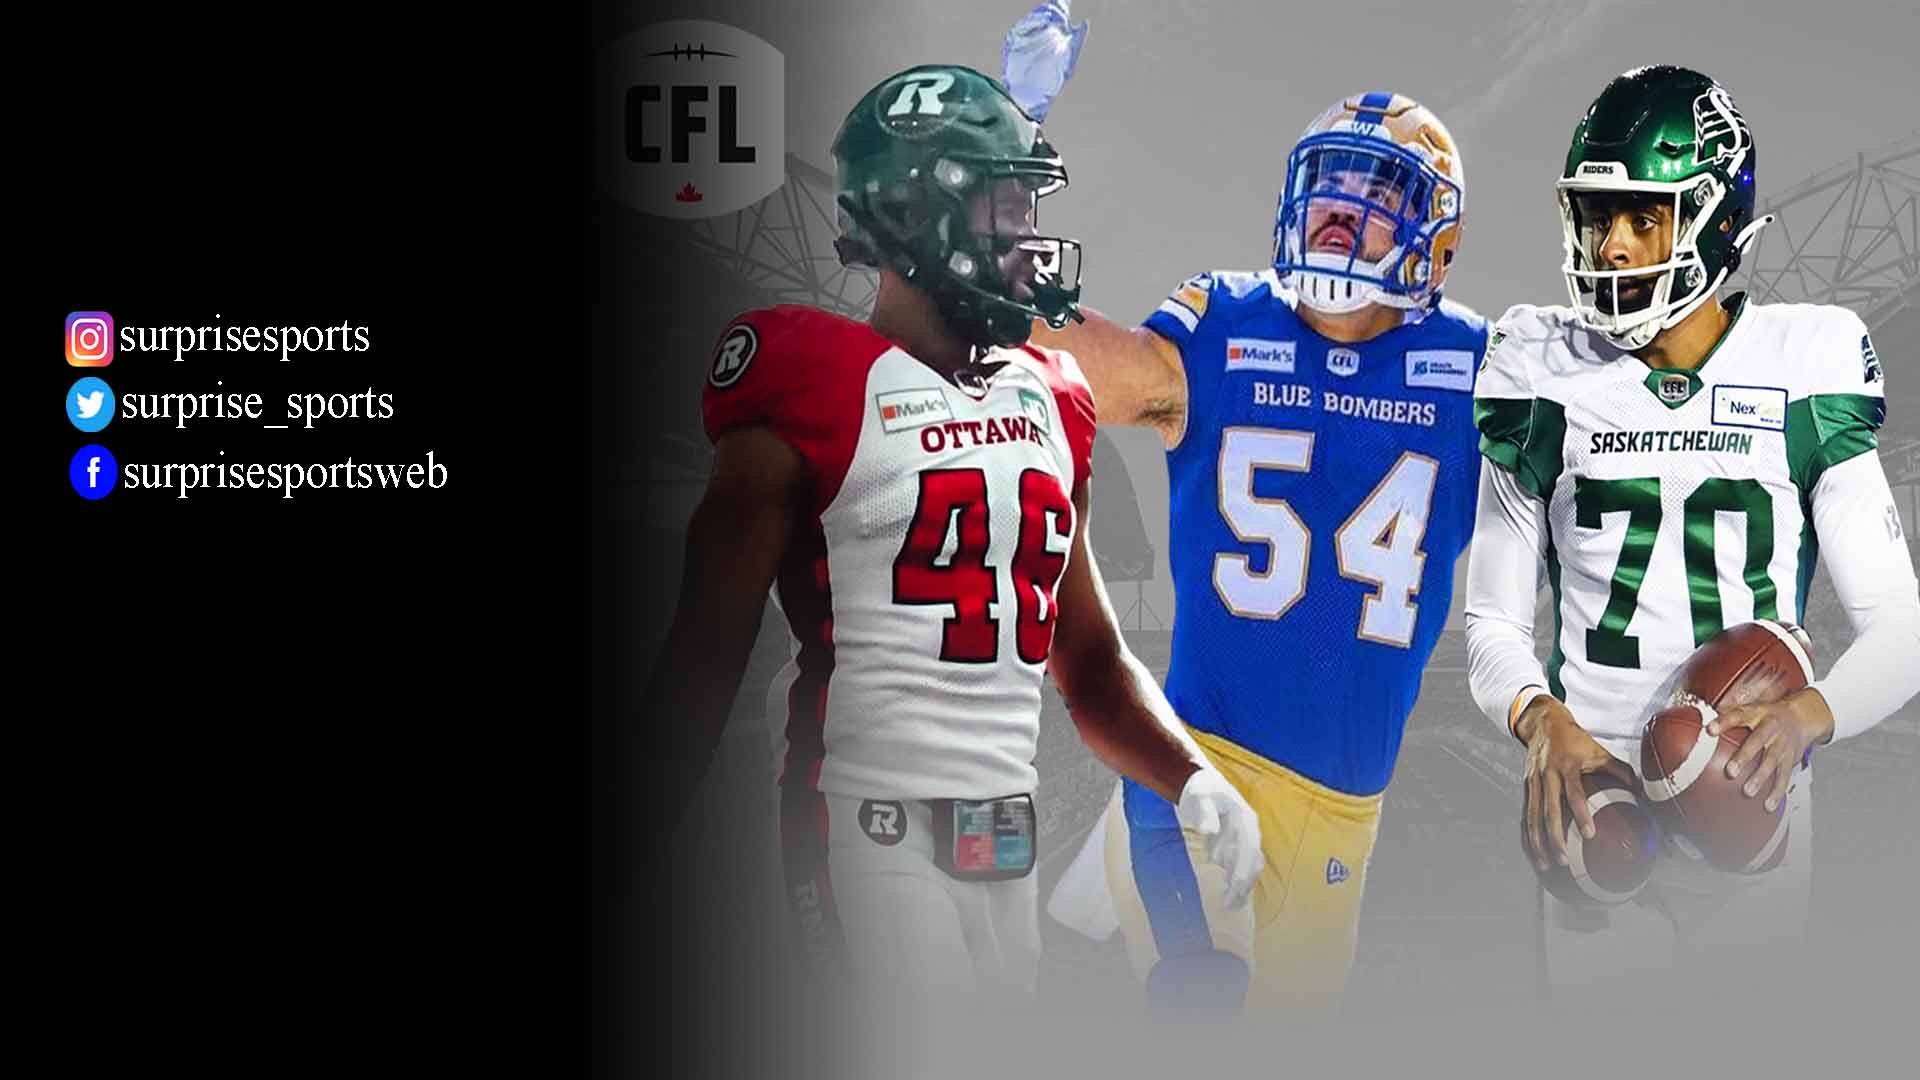 CFL Live Stream | How to Watch CFL Football Online and on TV | Surprise Sports